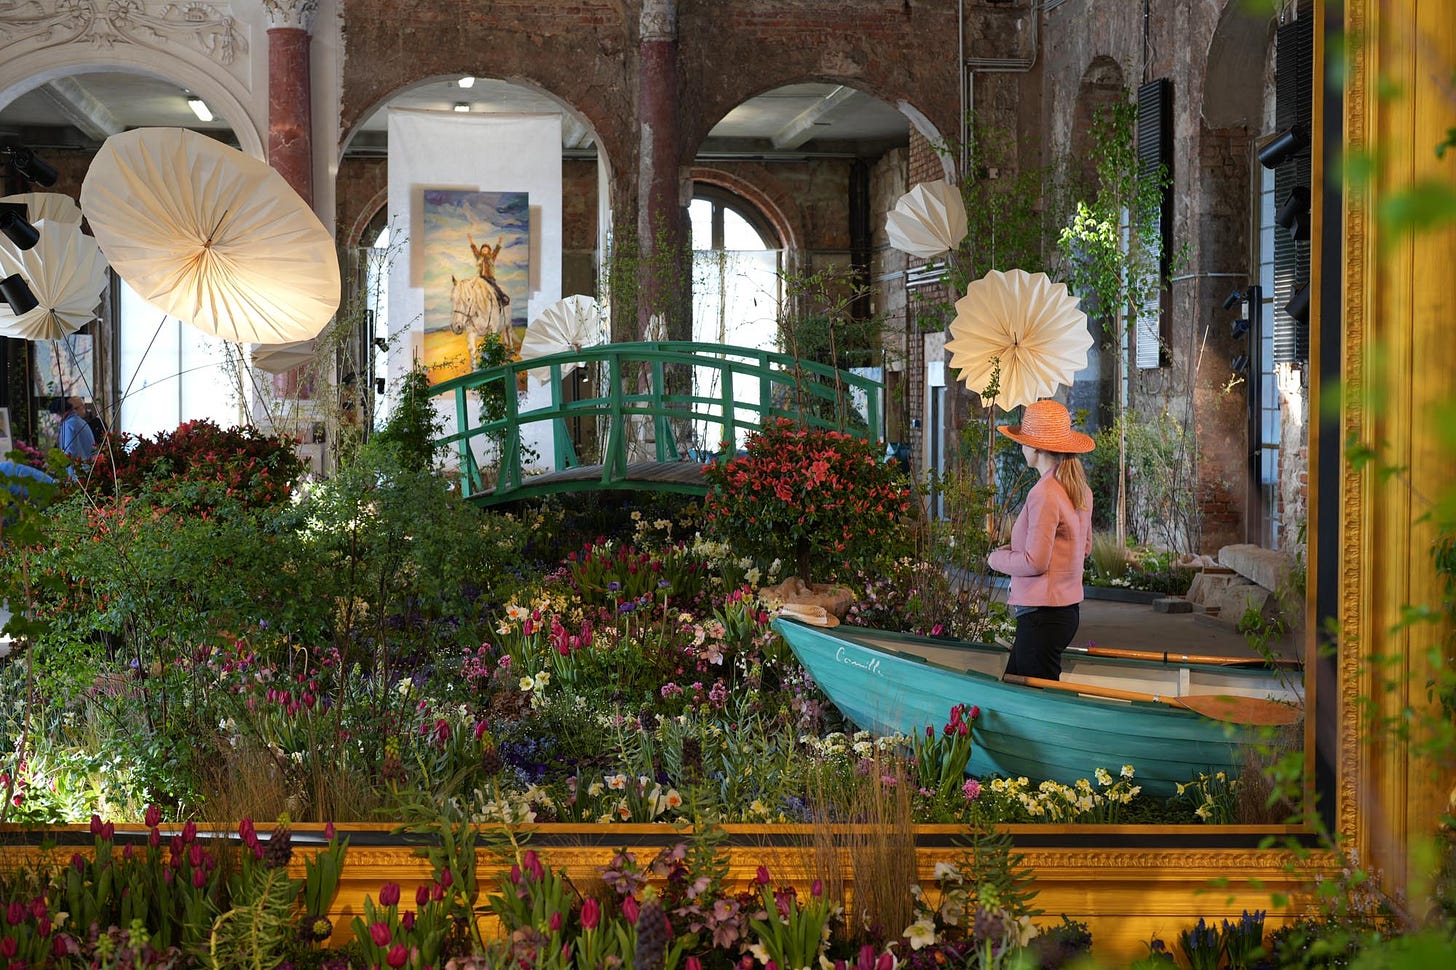 Monet's Water Lily Pond recreated life-size with flowers and a model in a boat.